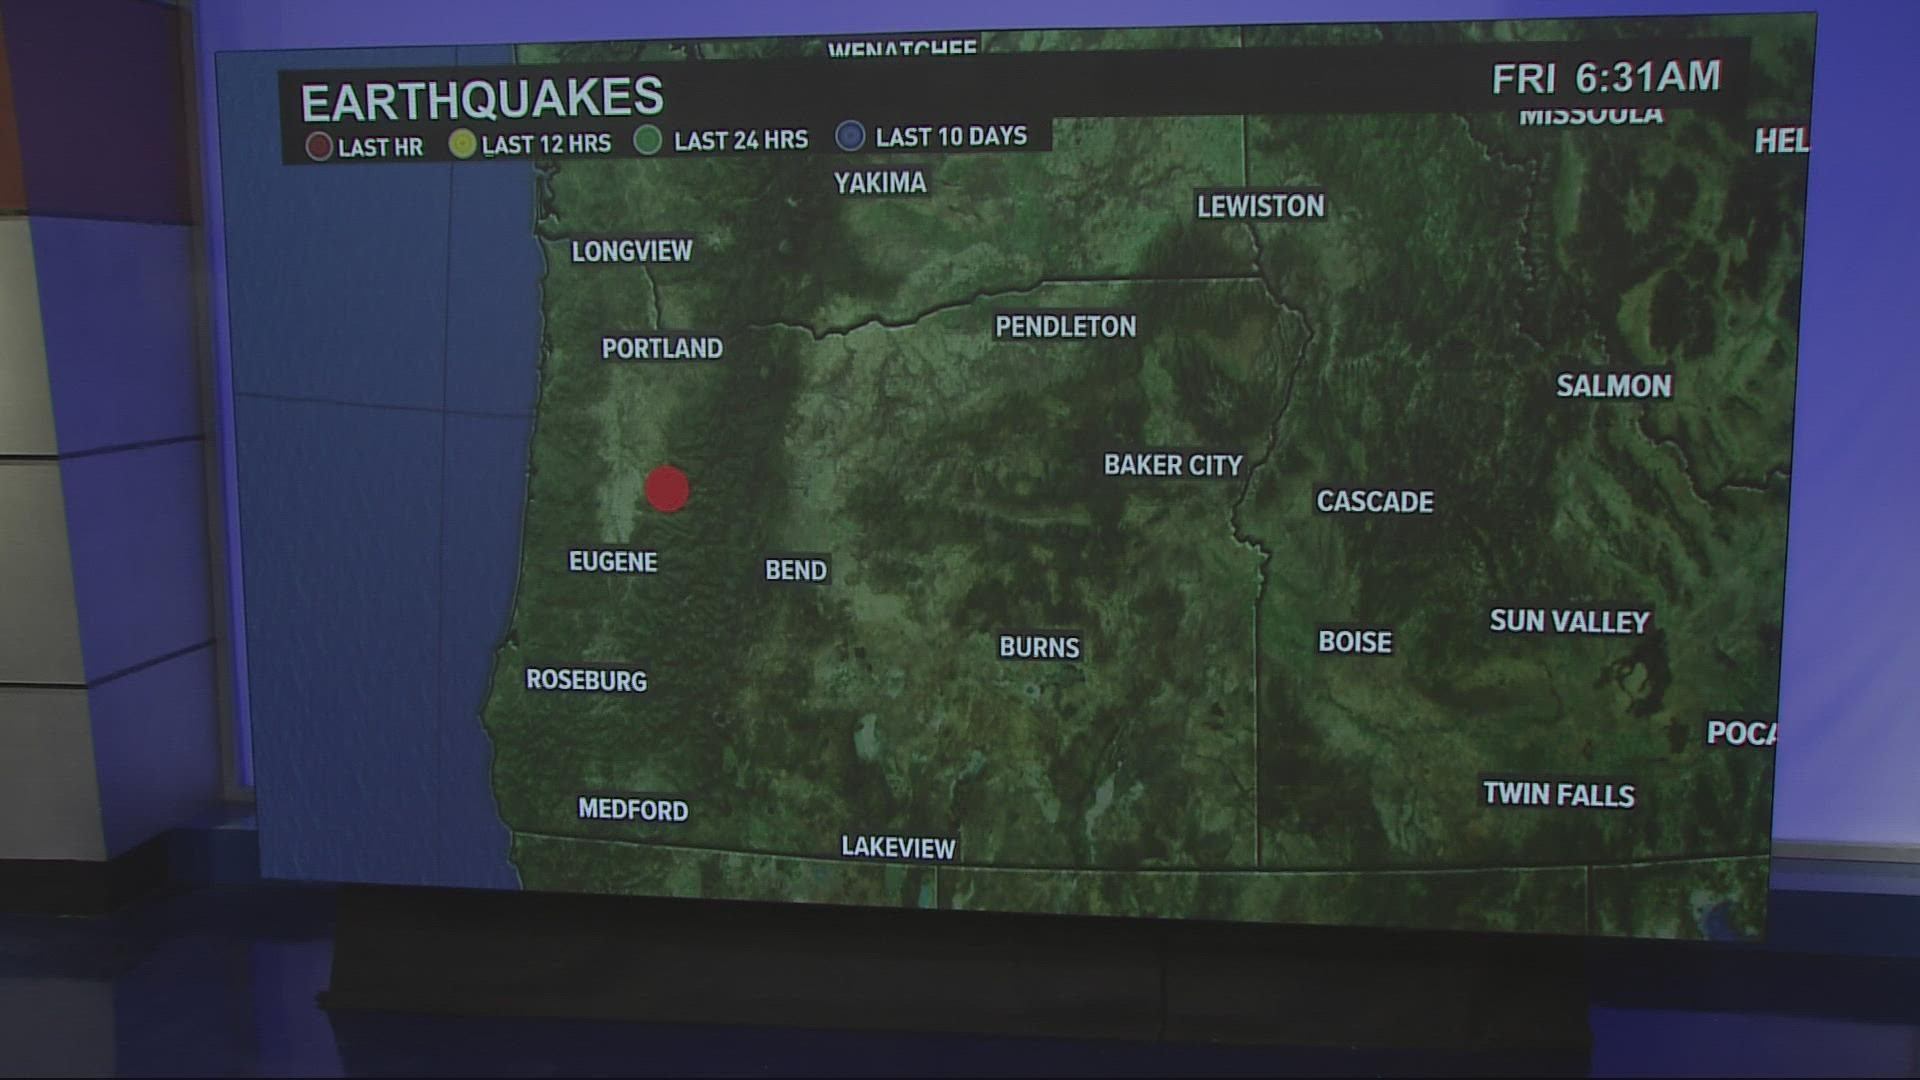 The U.S. Geological Survey reported the earthquake struck around 5:52 a.m. on Friday. It happened 9.3 miles from Lacomb, Oregon, which is southeast of Salem.